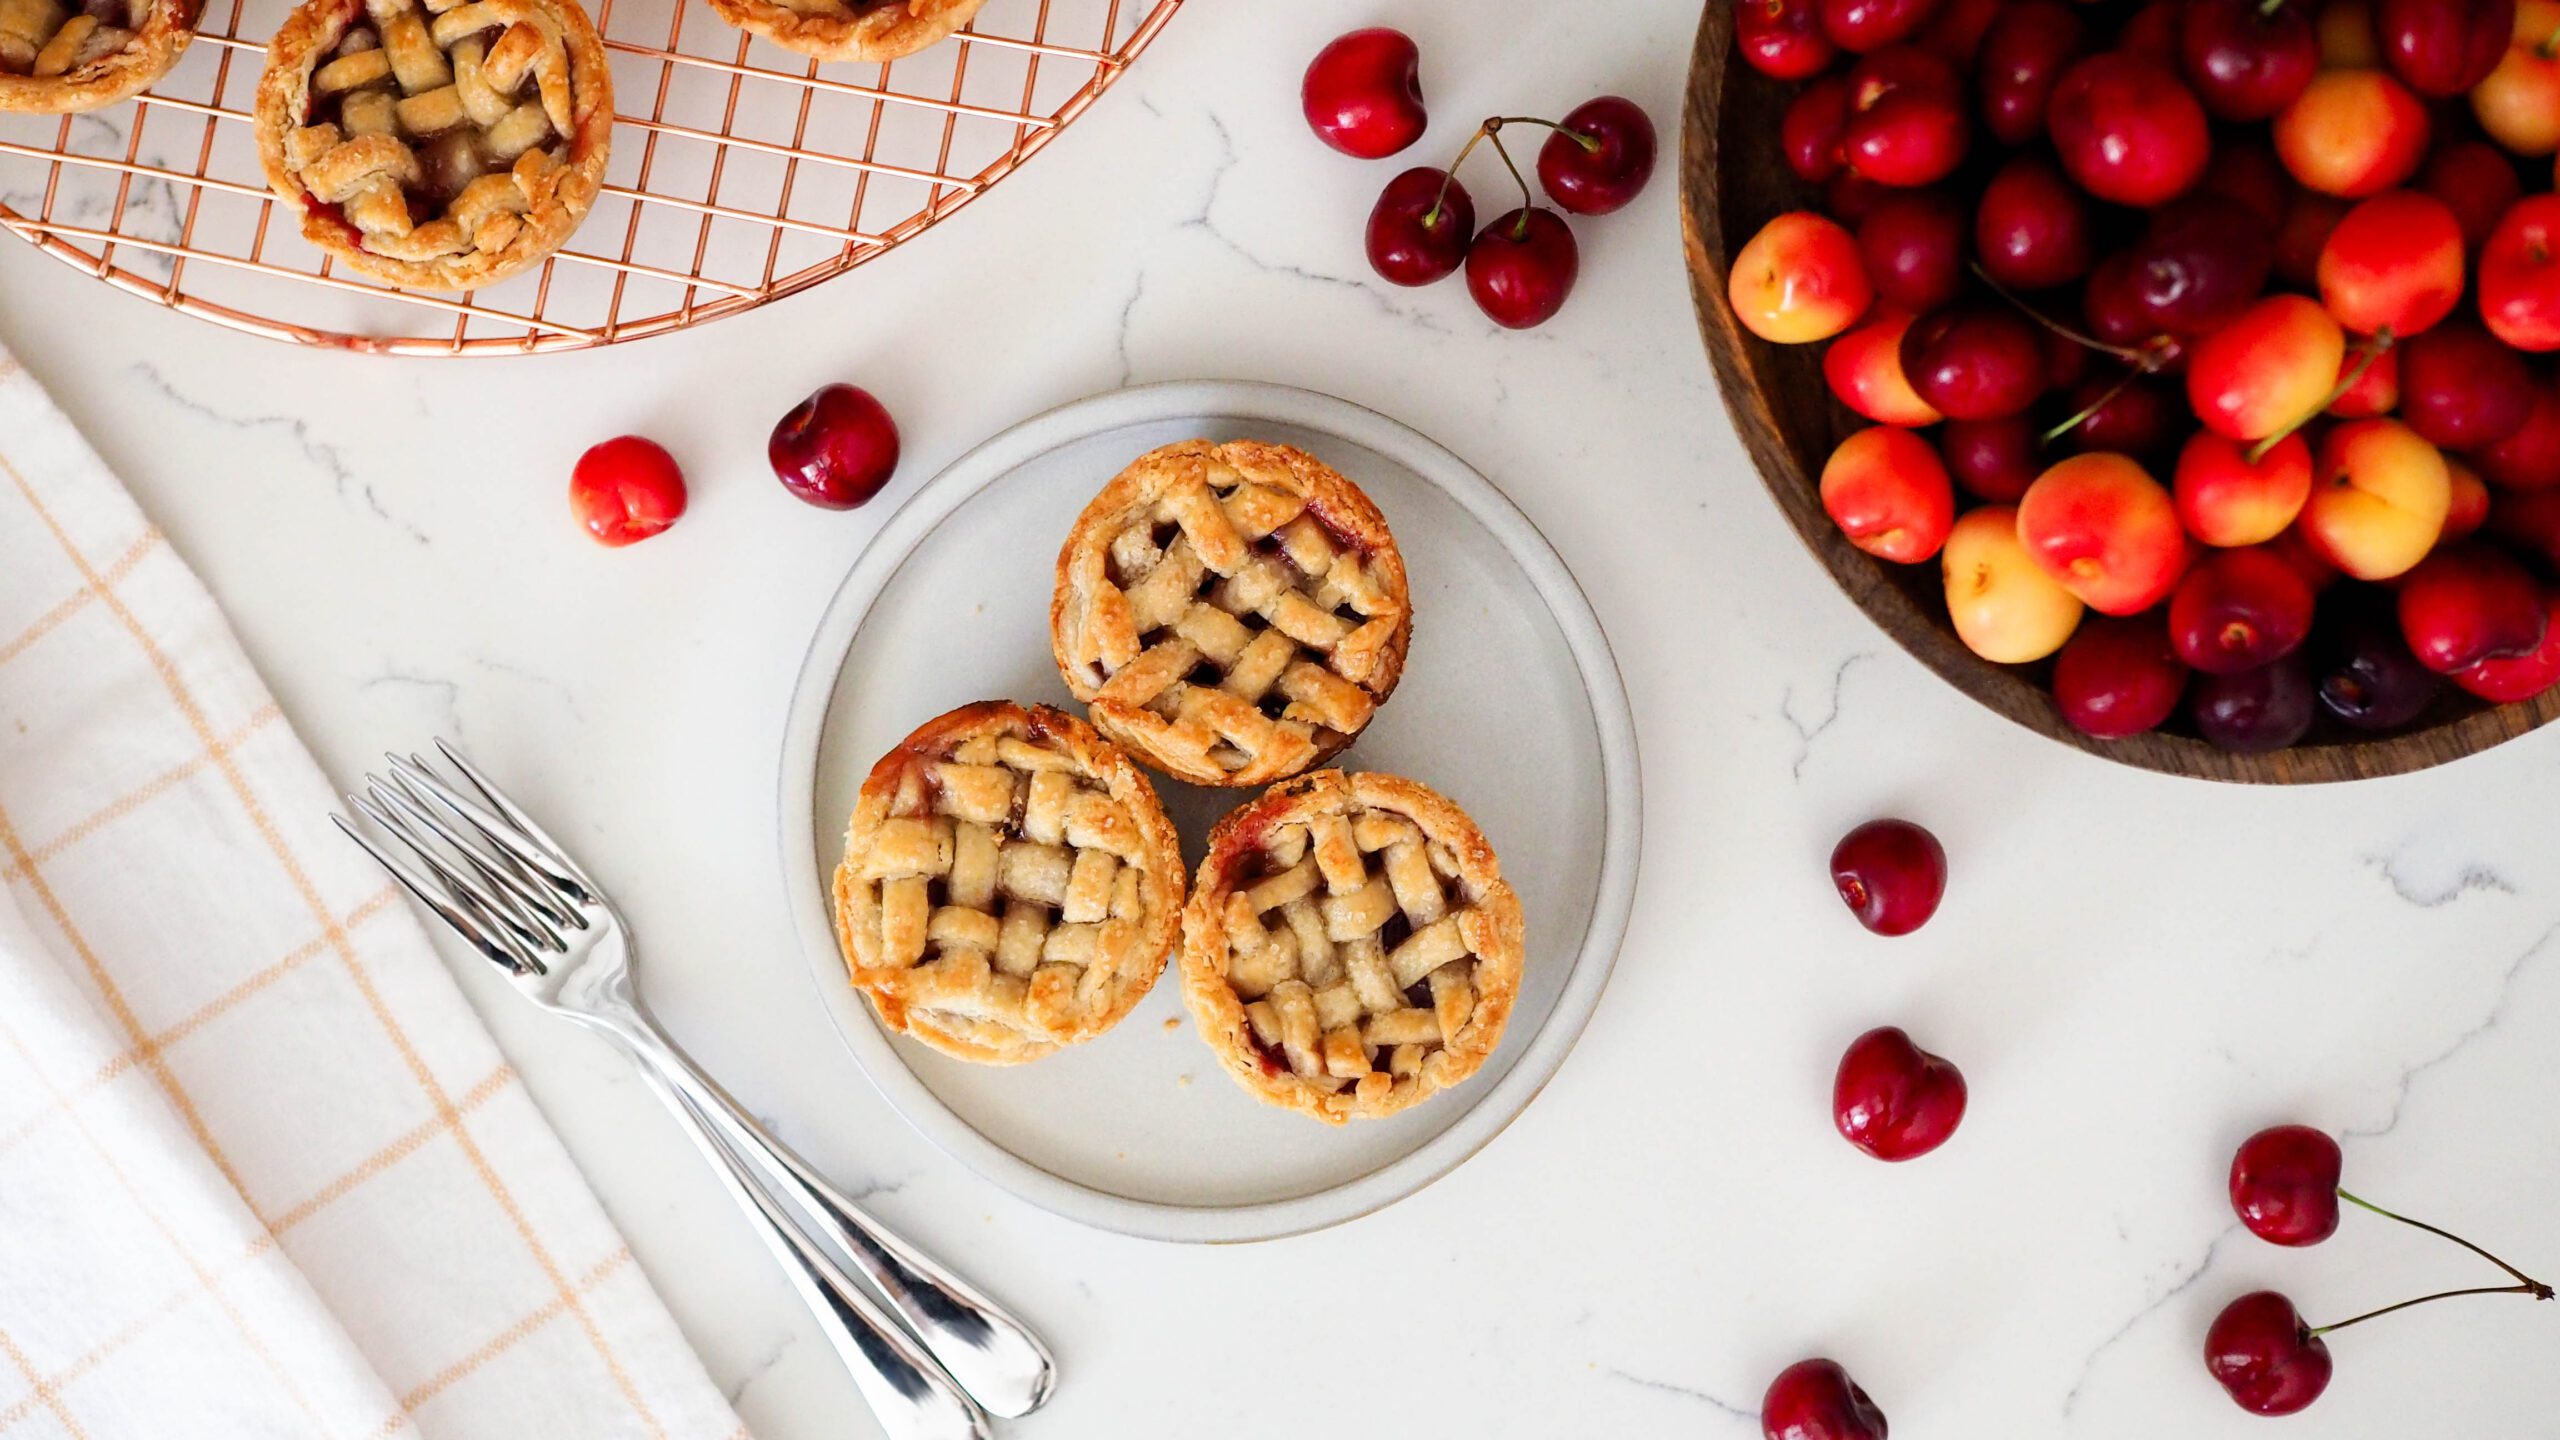 A plate with three mini cherry pies surrounded by cherries.